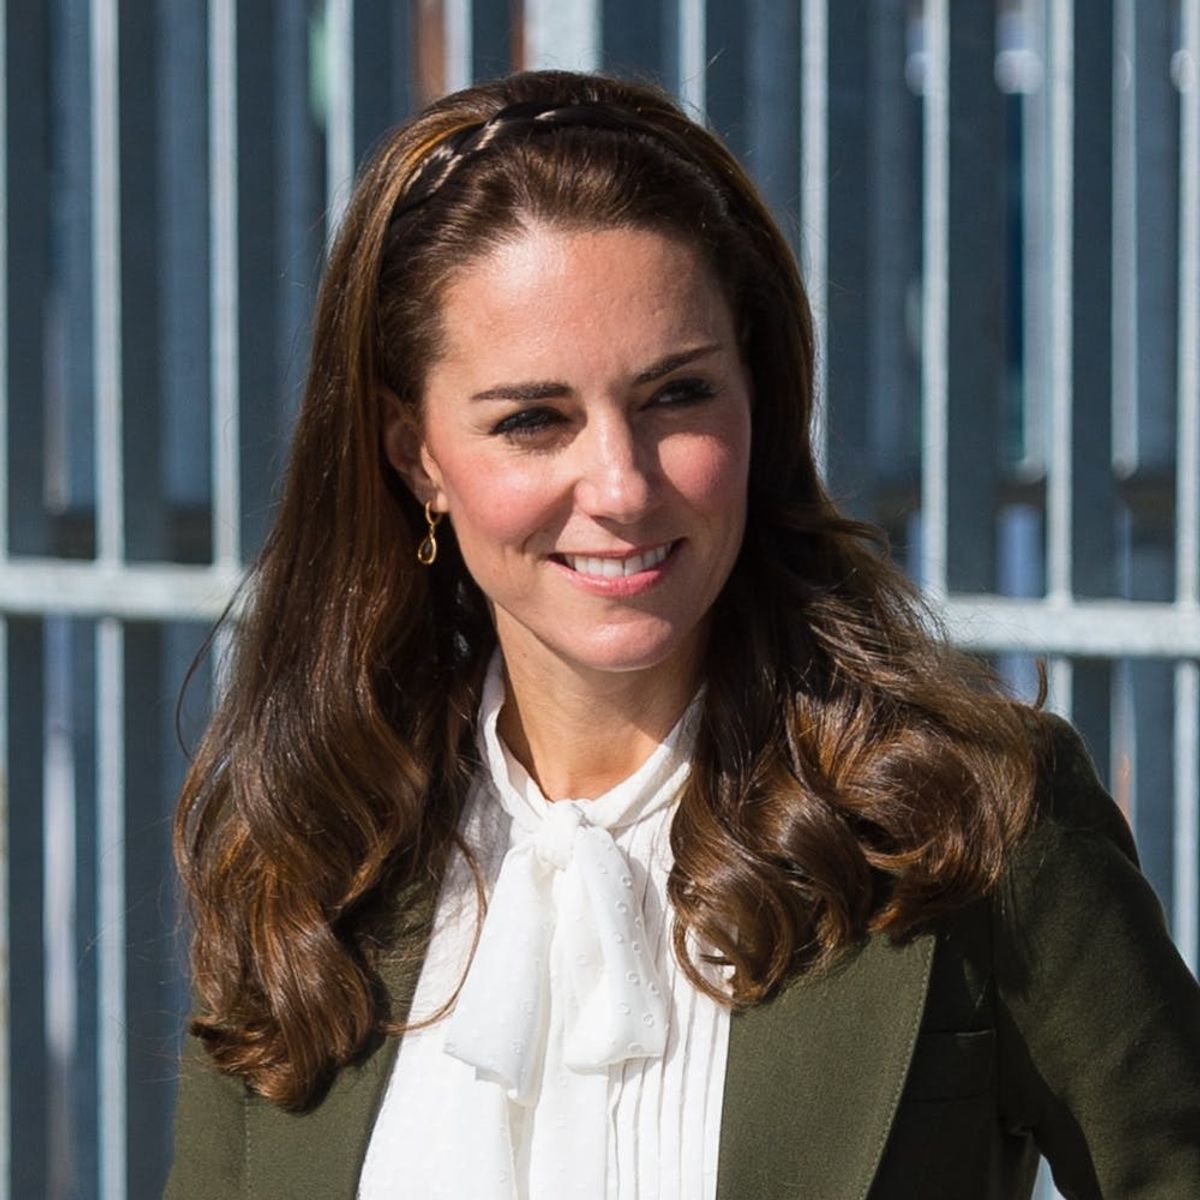 If You’re Looking for a Royal Dream Job, Kate Middleton Needs a New Personal Secretary